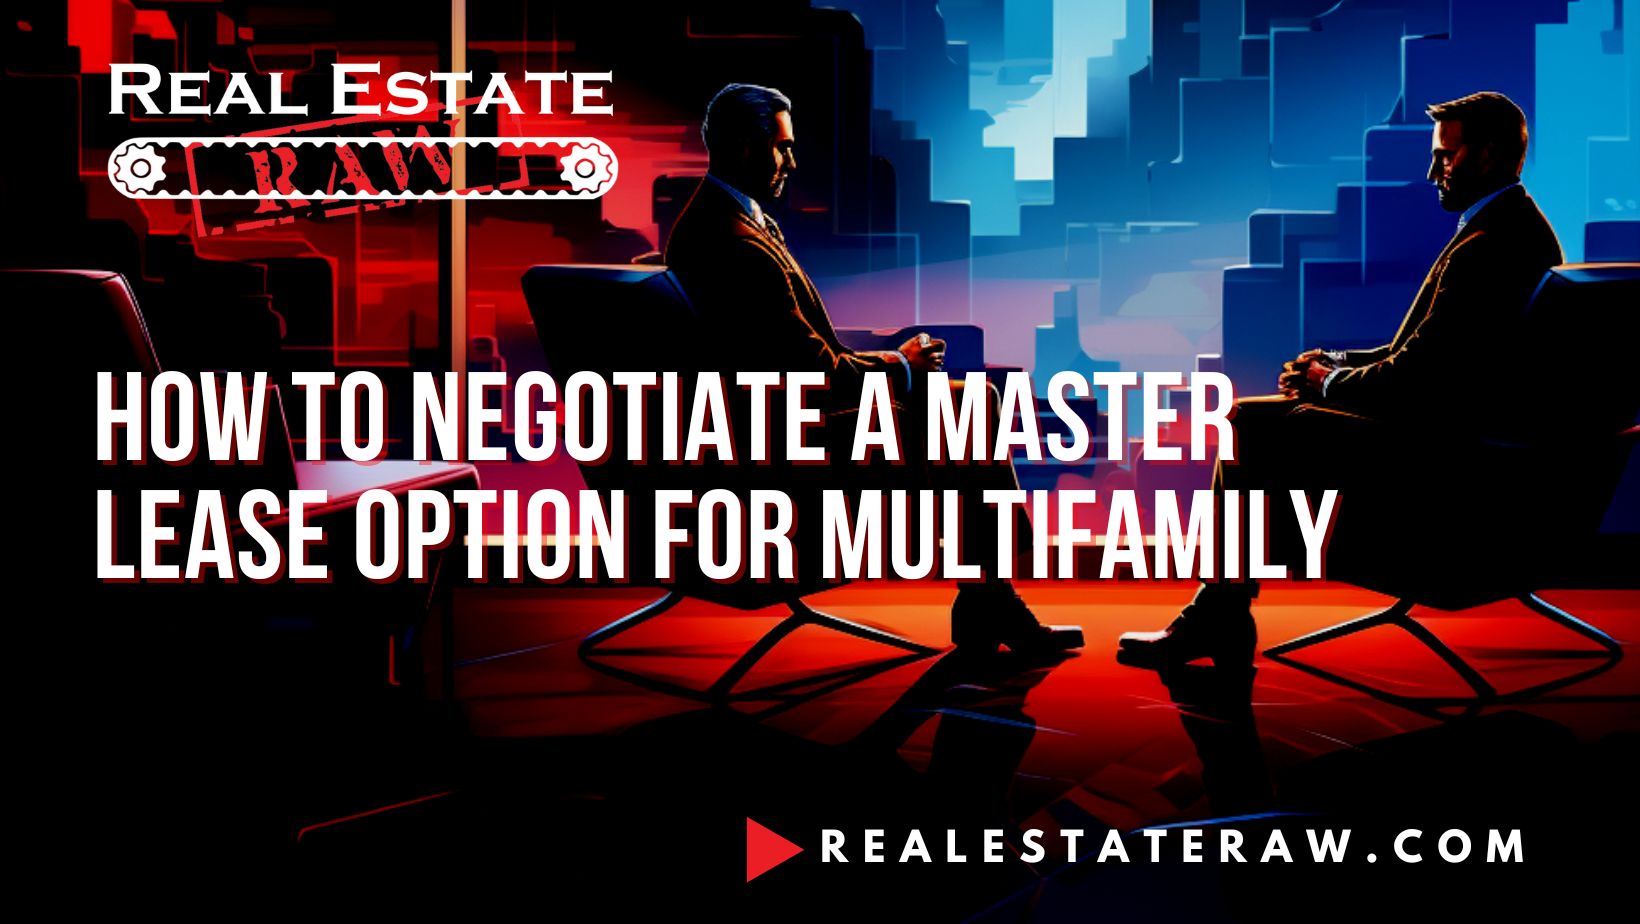 How to Negotiate a Master Lease Option for Multifamily